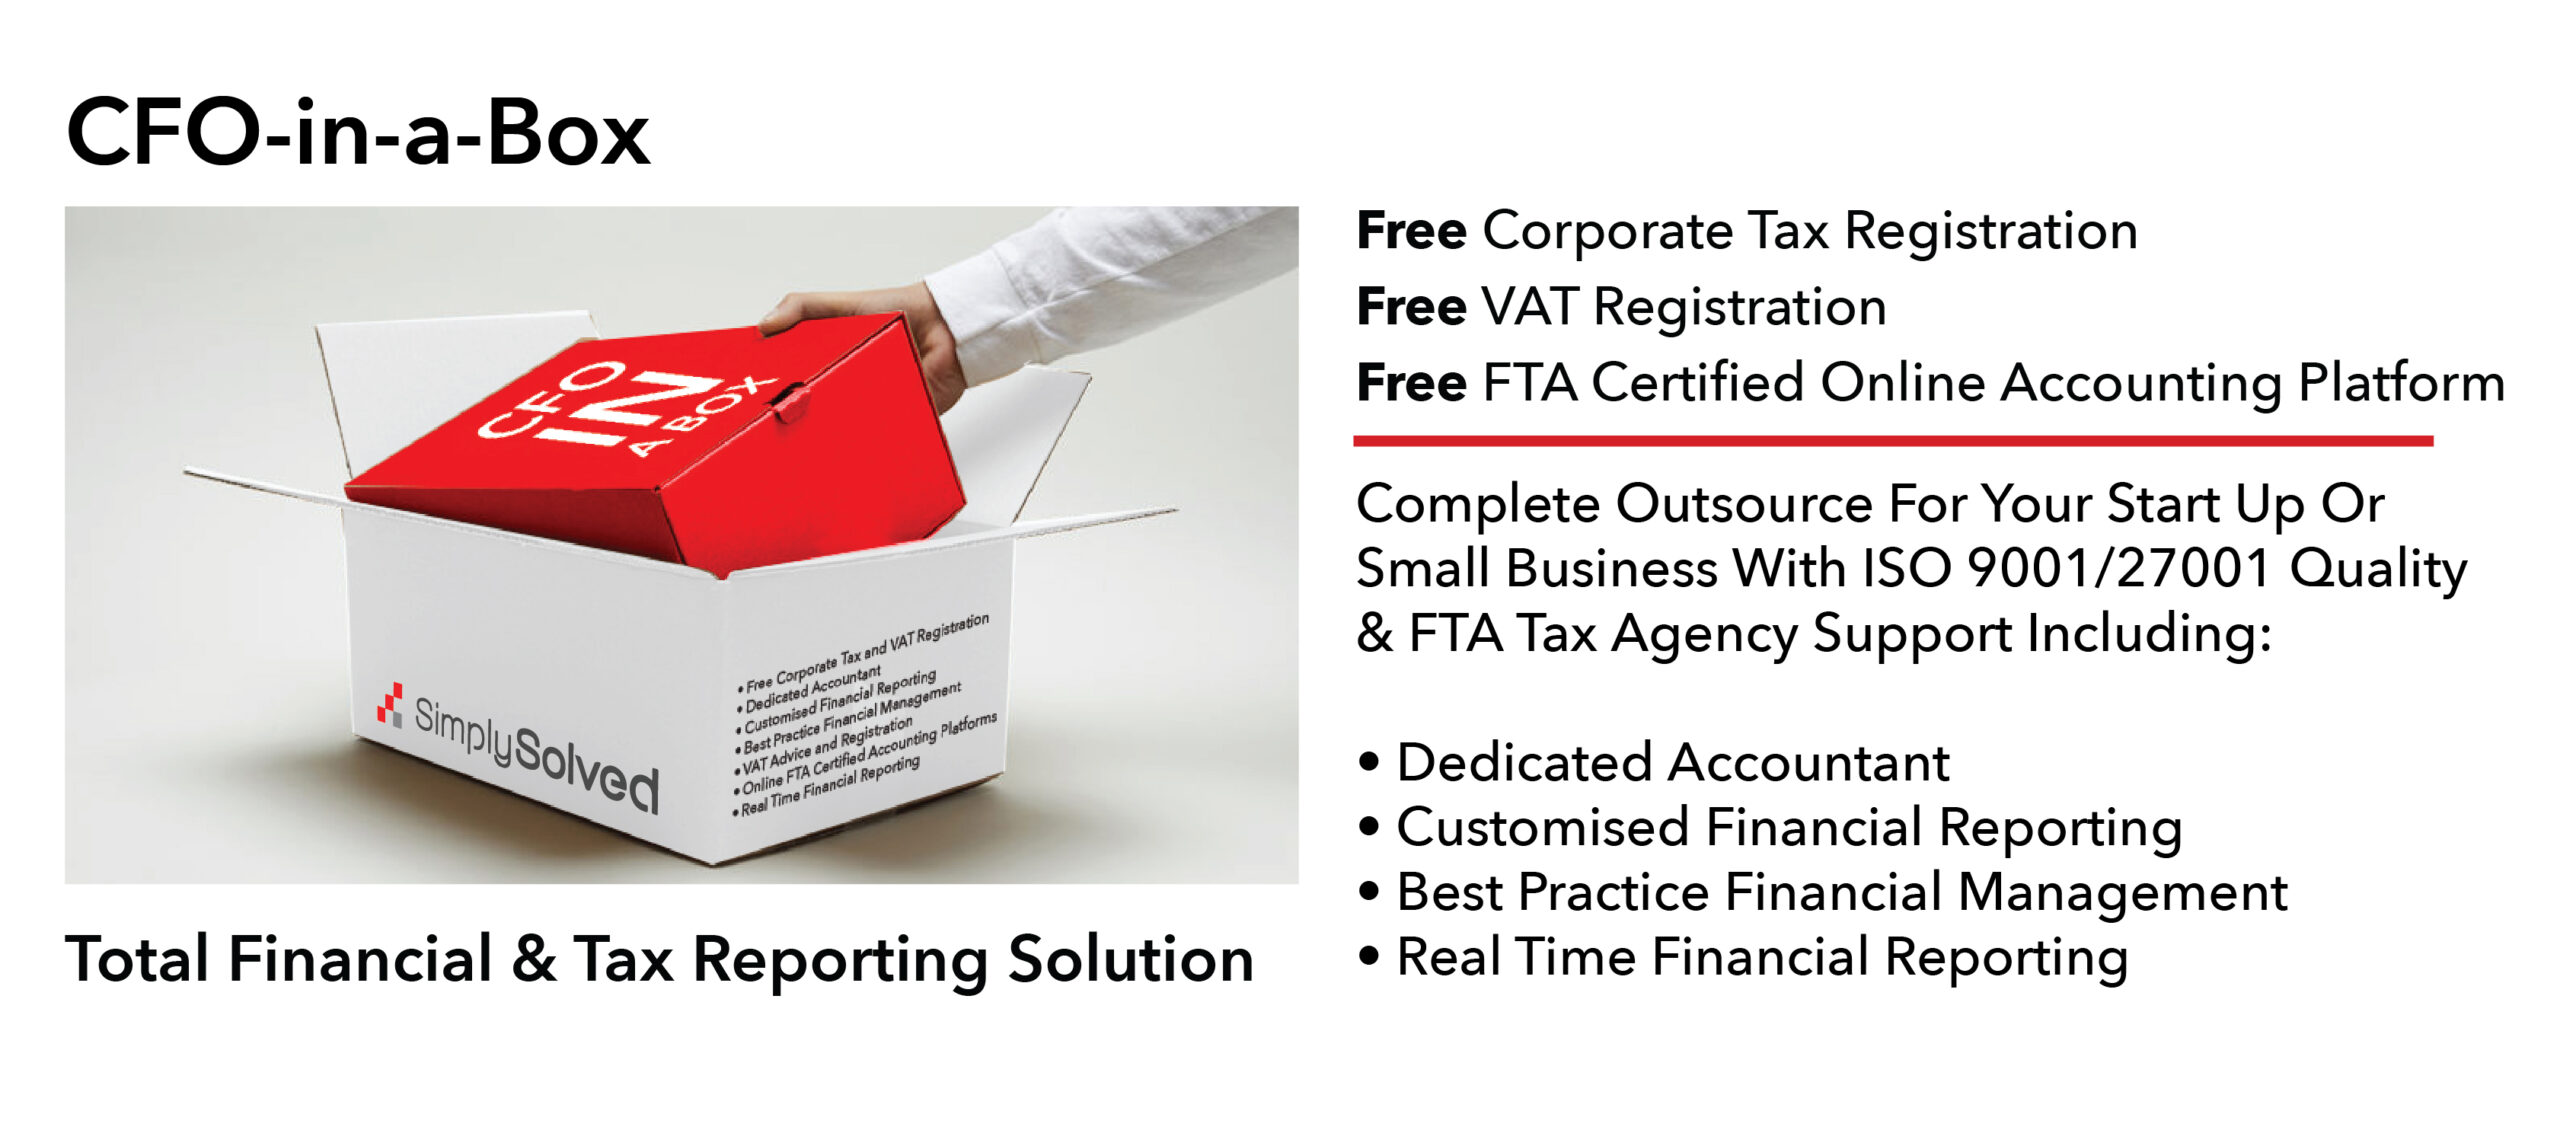 Outsourced Accounting Services with Free VAT Registration -SimplySolved